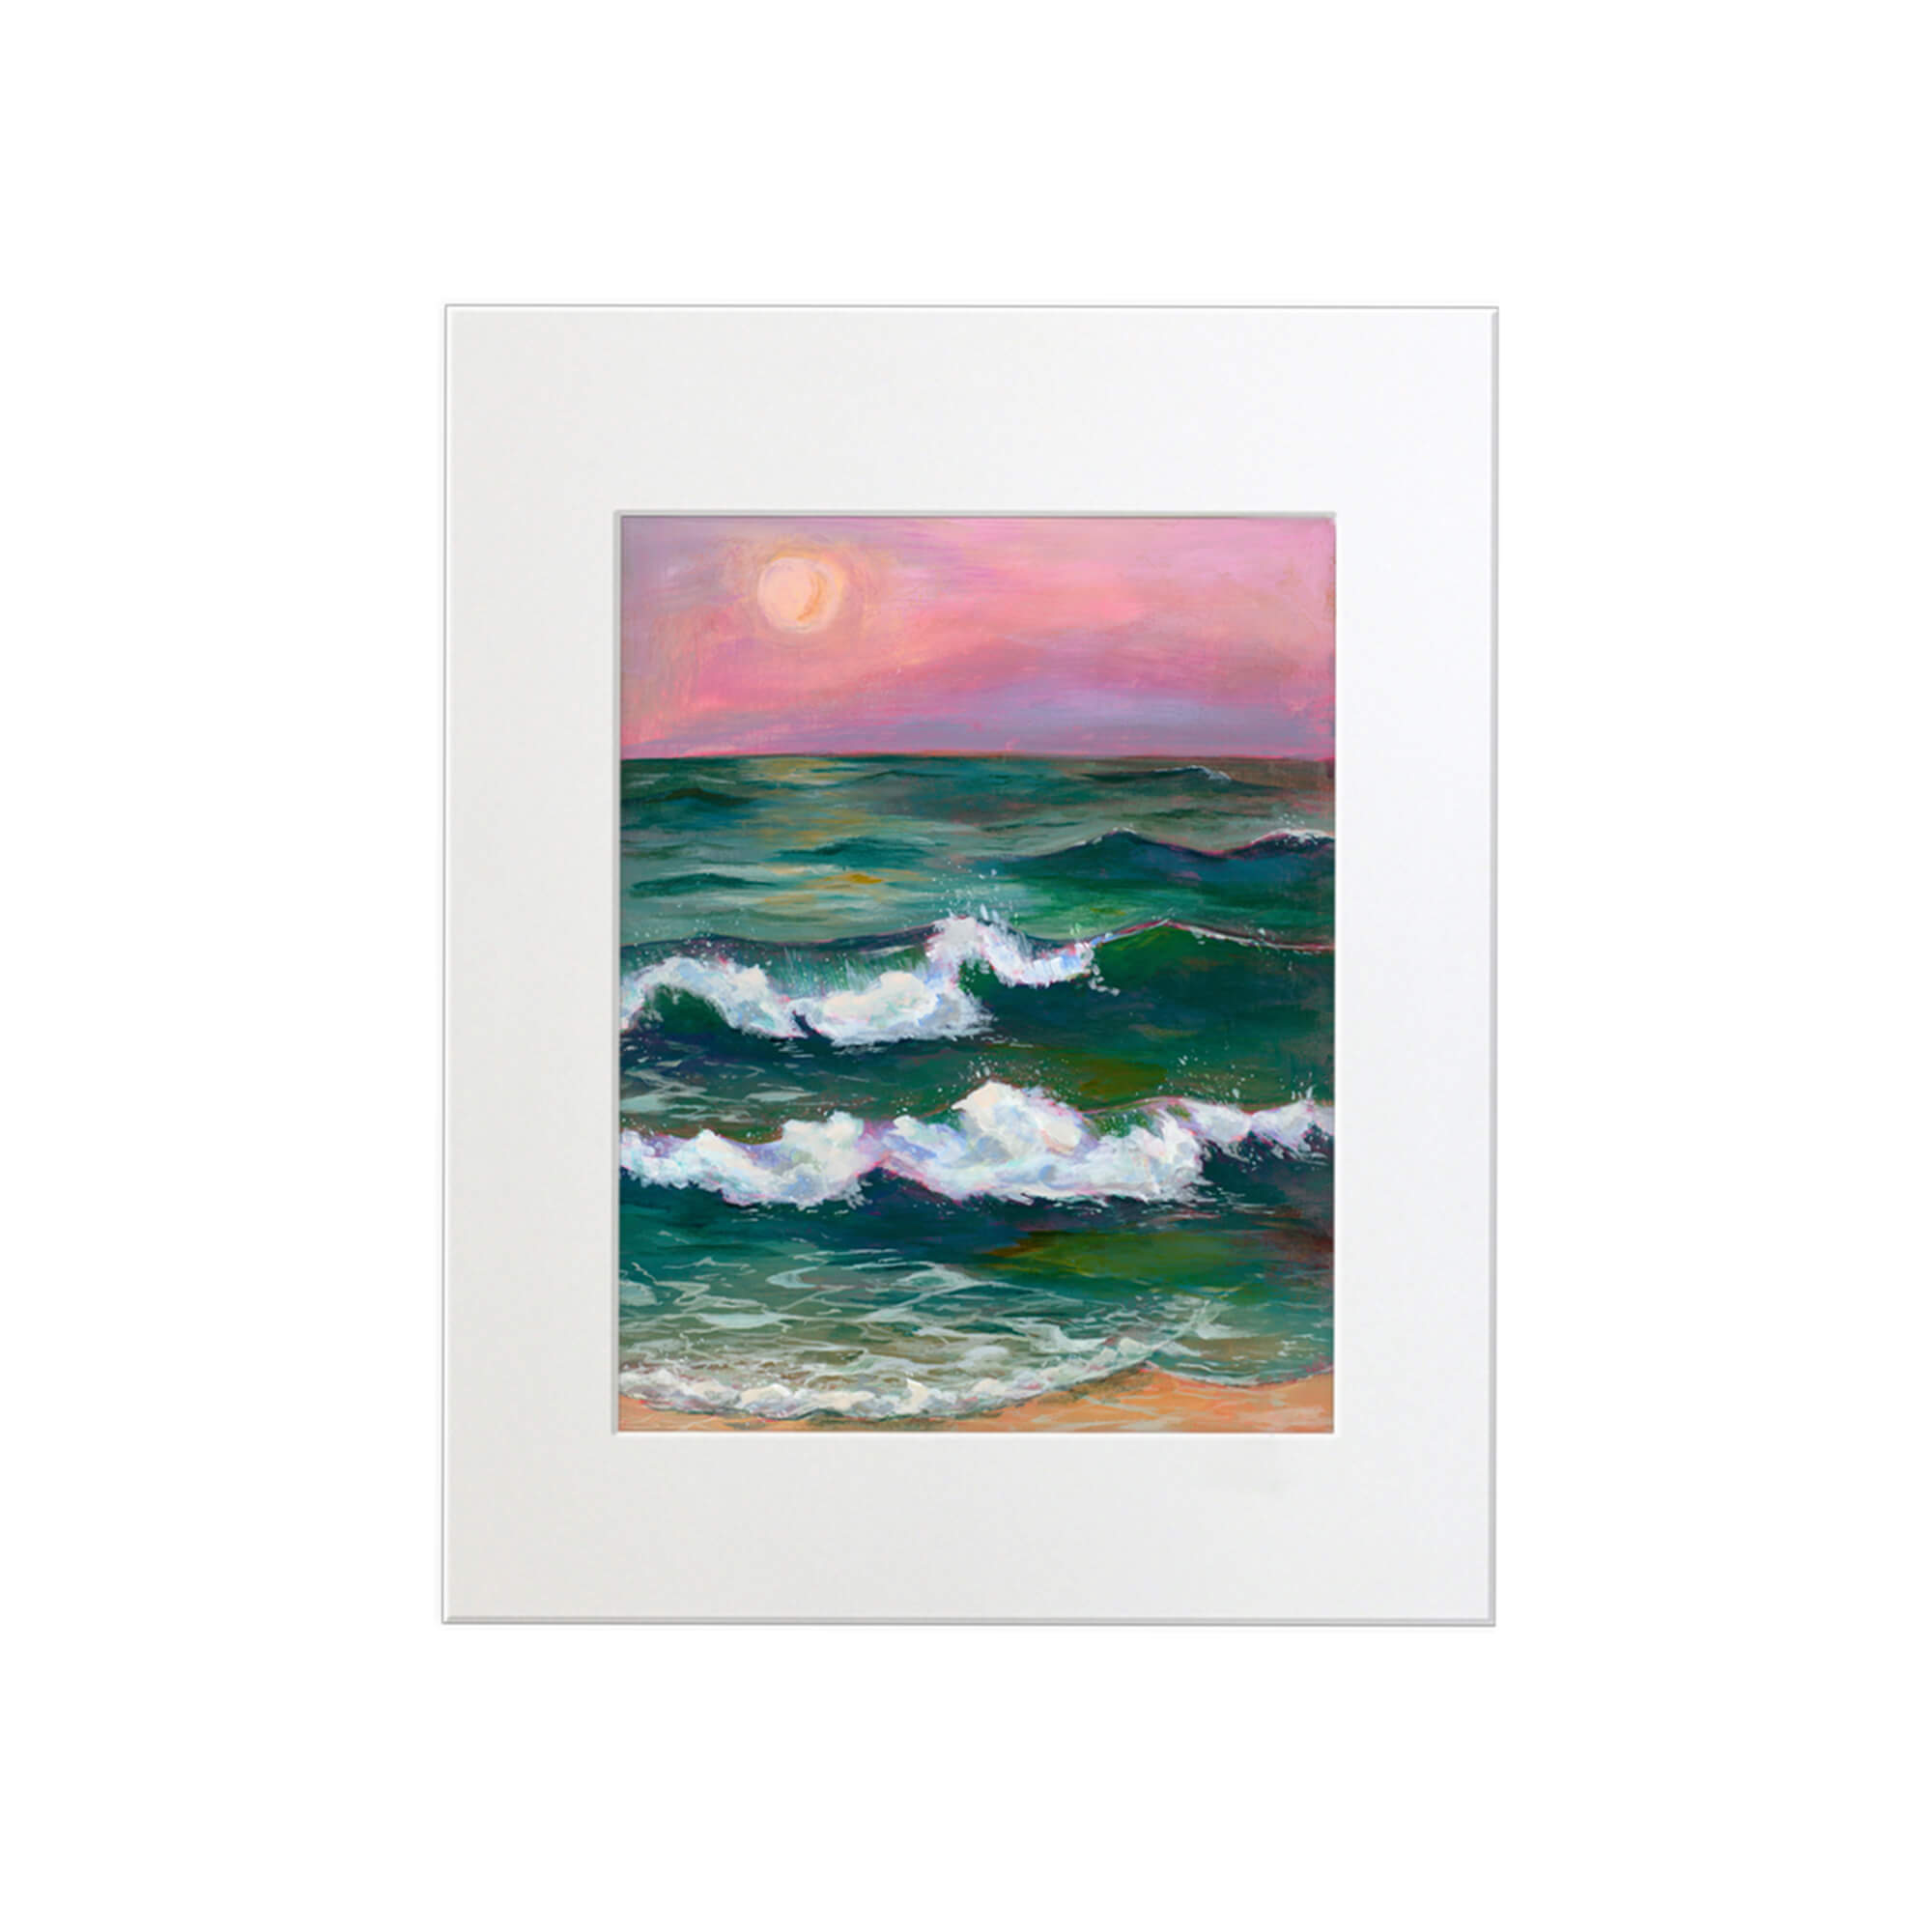 Emerald hued ocean and pink colored sunset sky by Hawaii artist Lindsay Wilkins